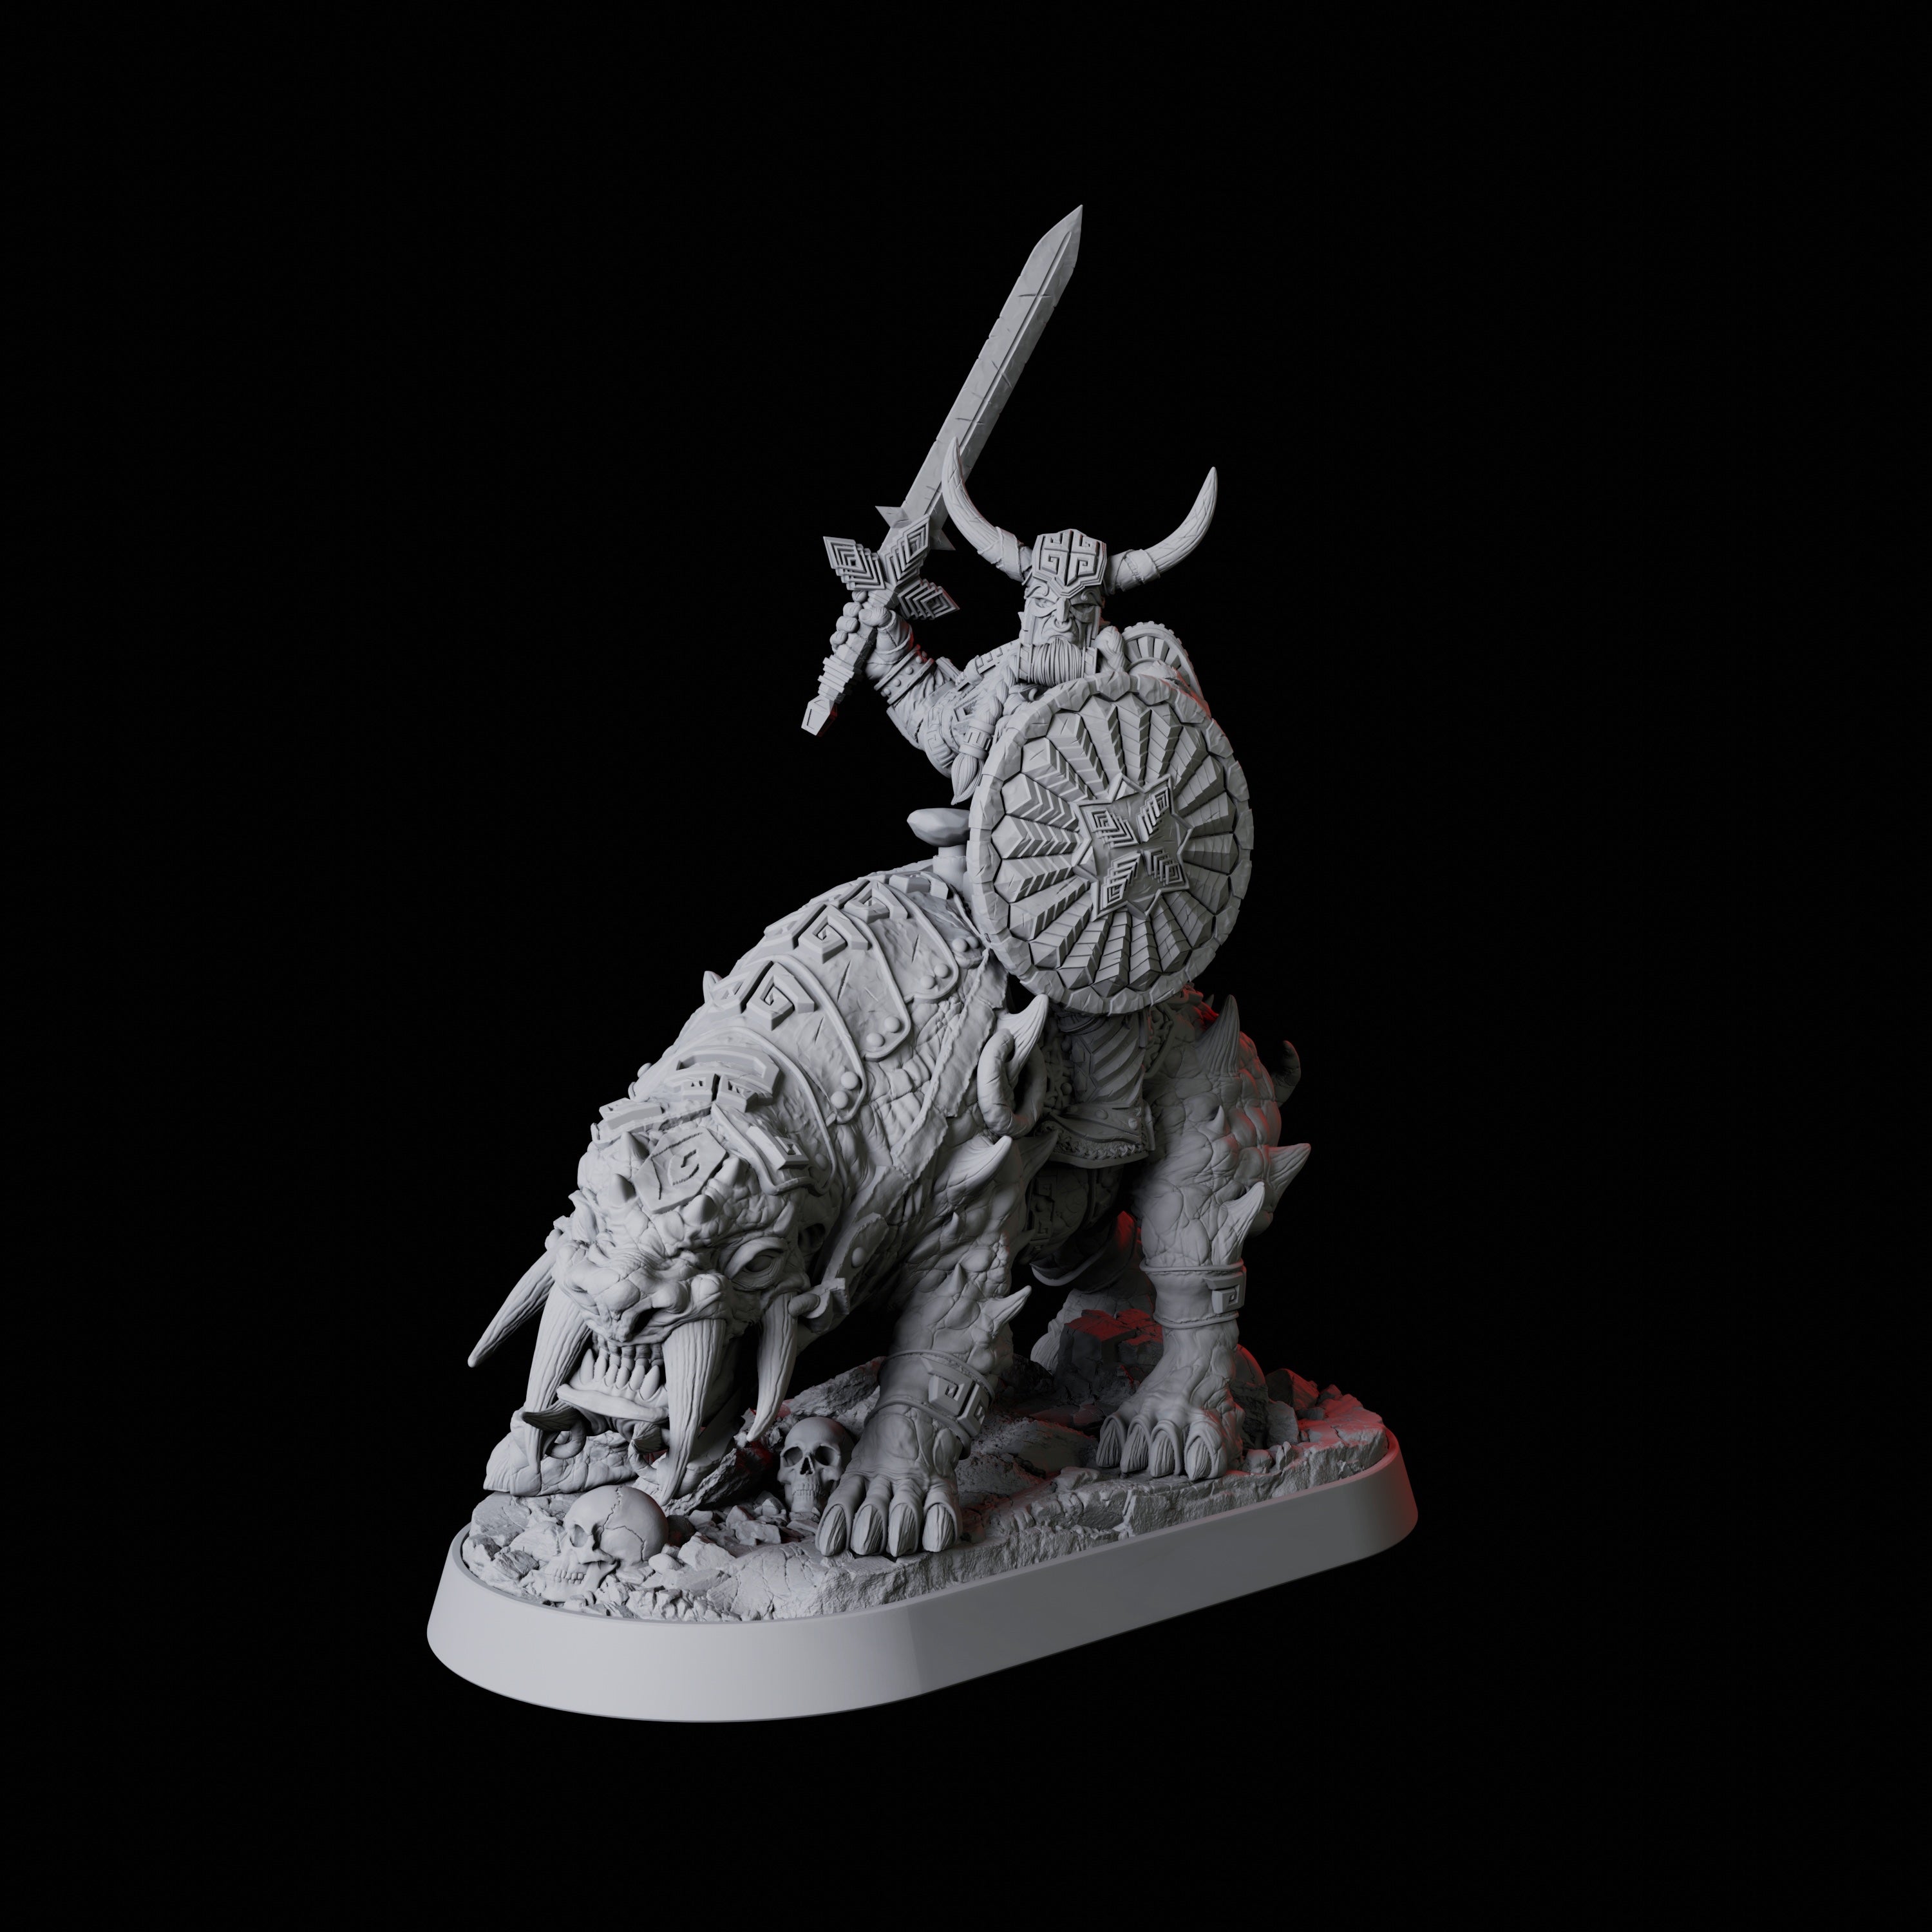 Mounted Barbarian Warrior Miniature for Dungeons and Dragons